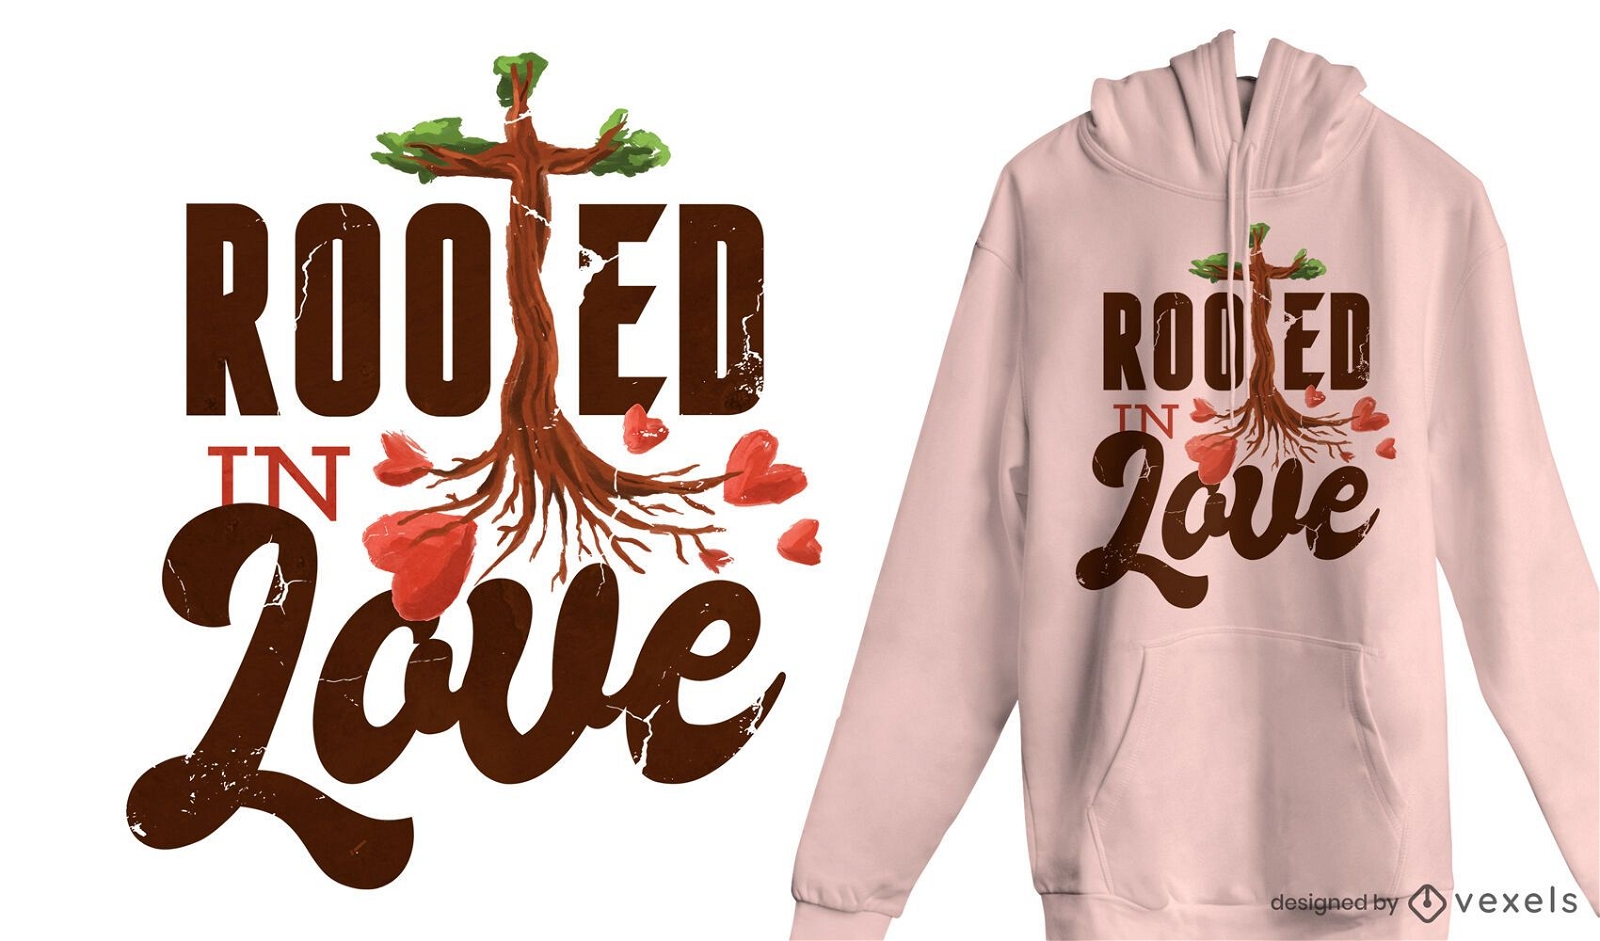 Rooted love t-shirt design